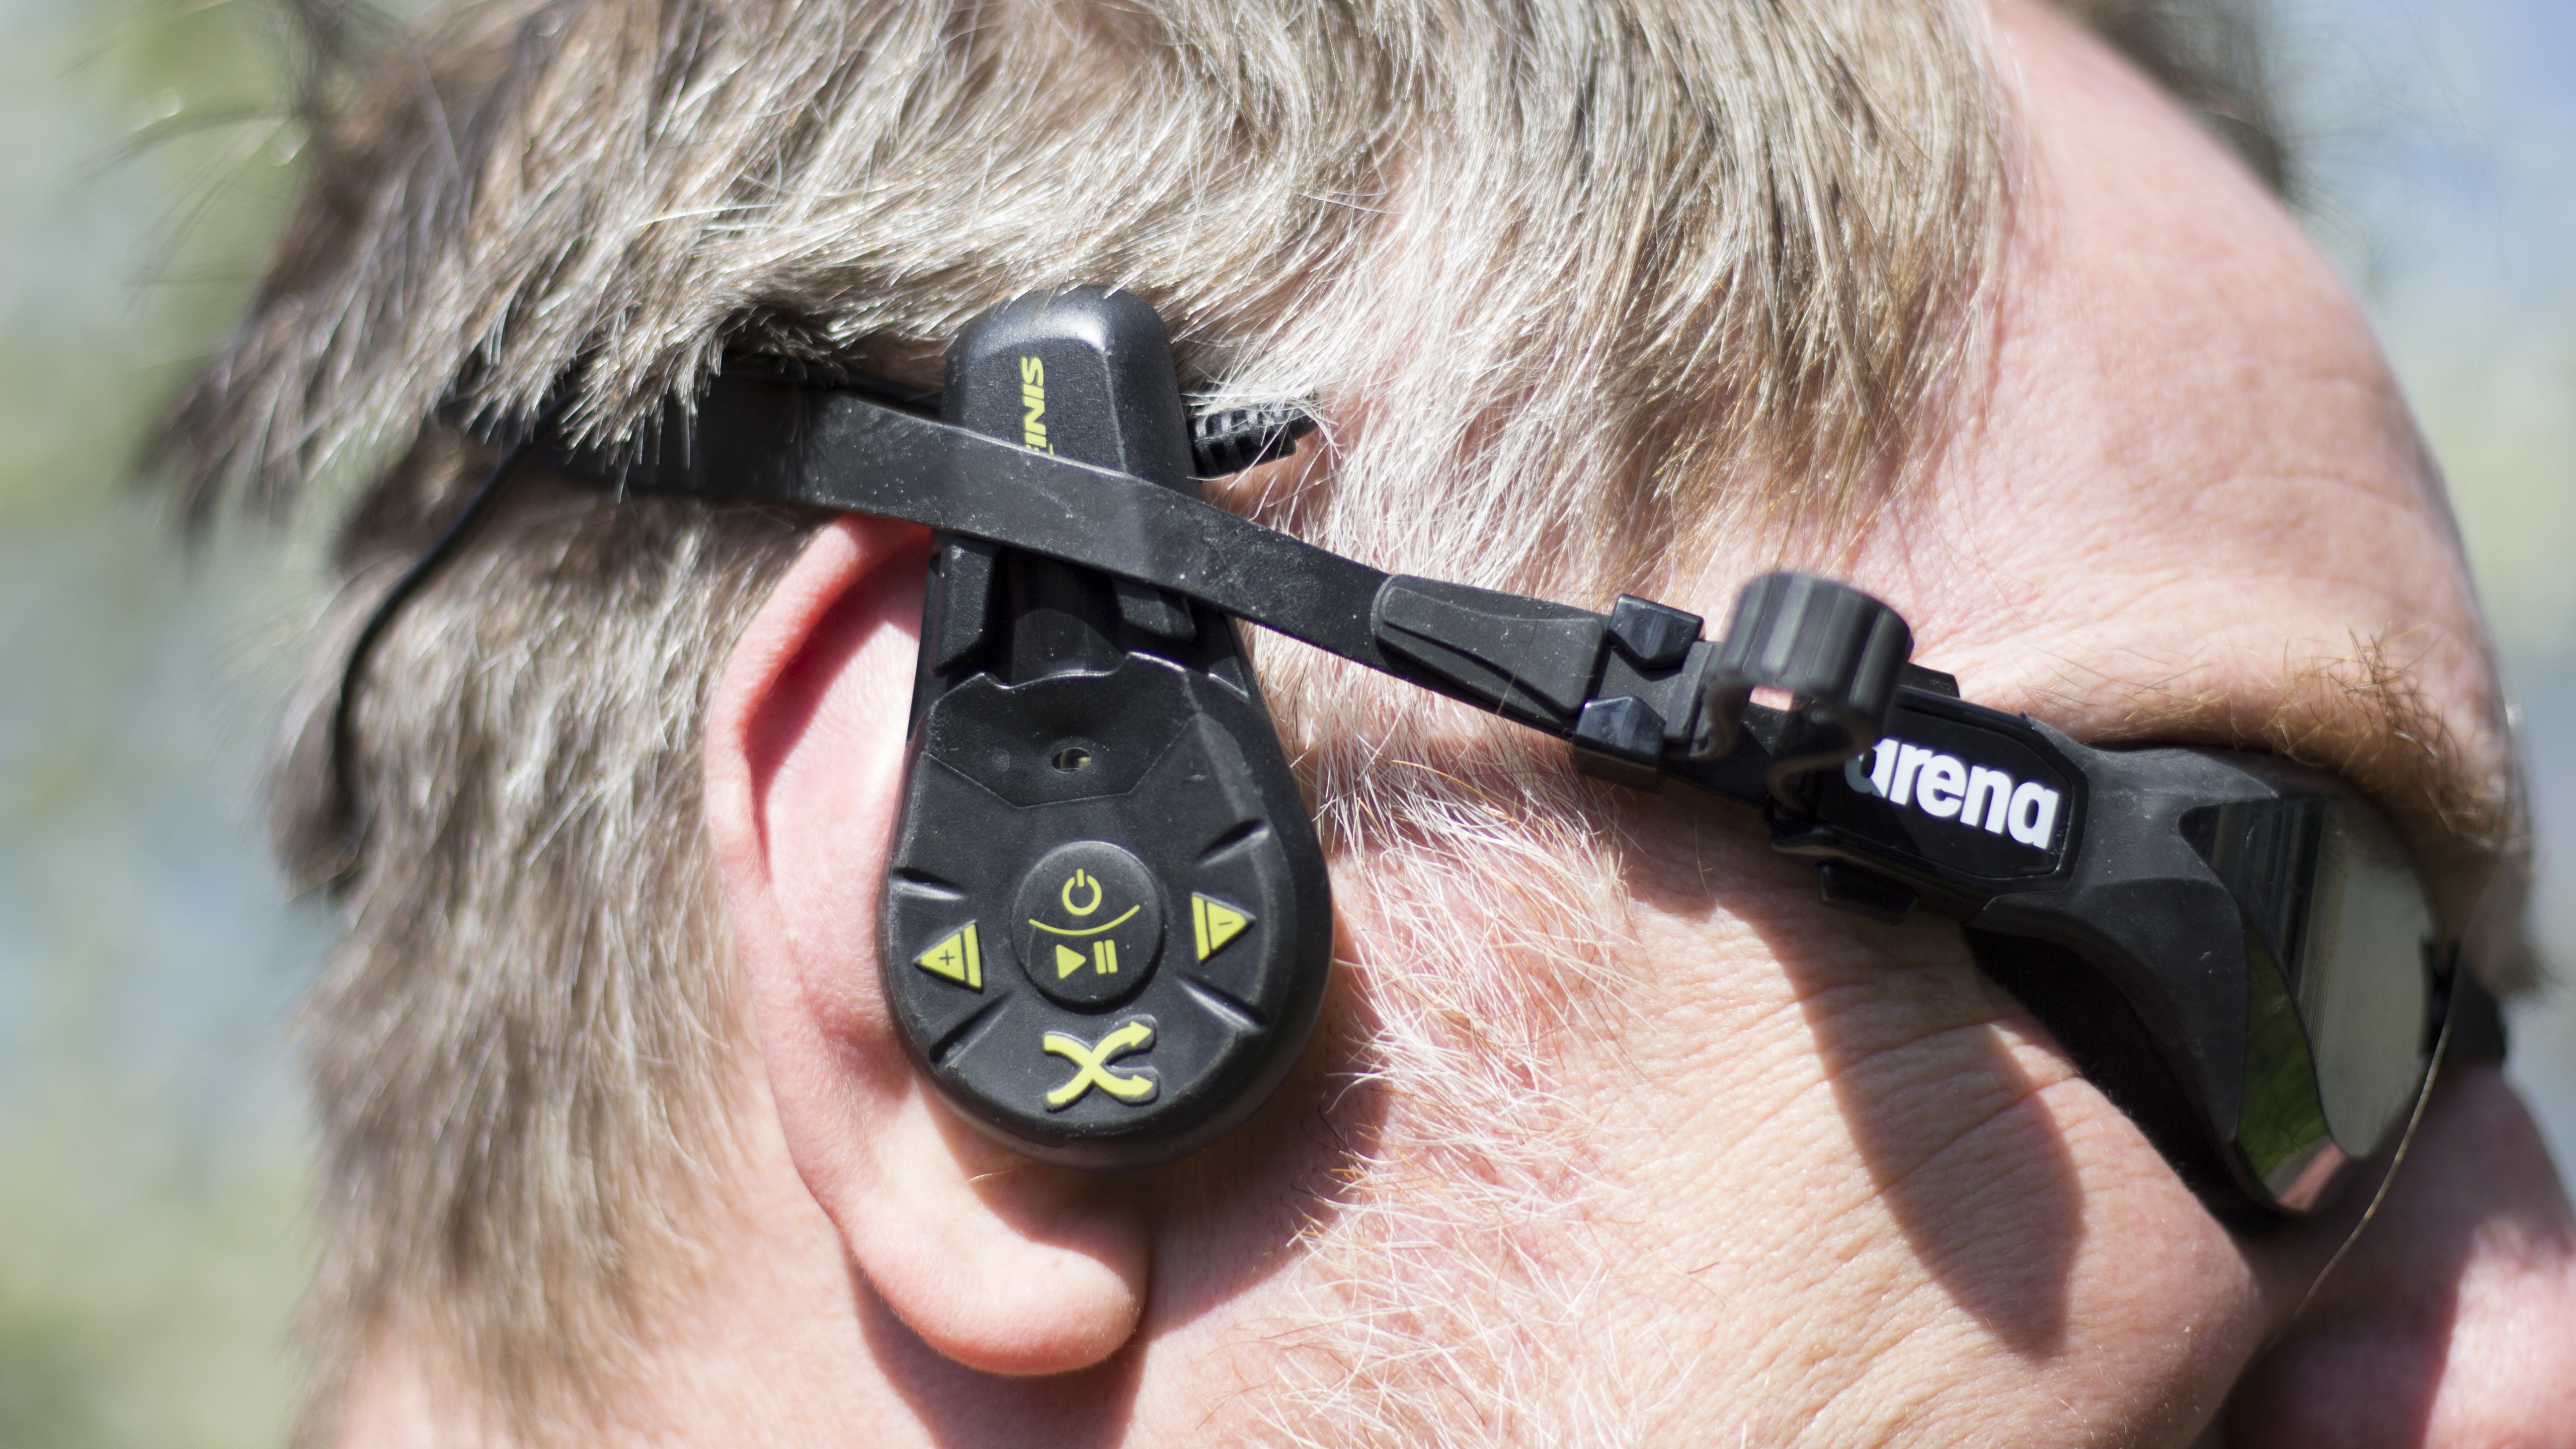 Finis Duo headphones worn by the reviewer